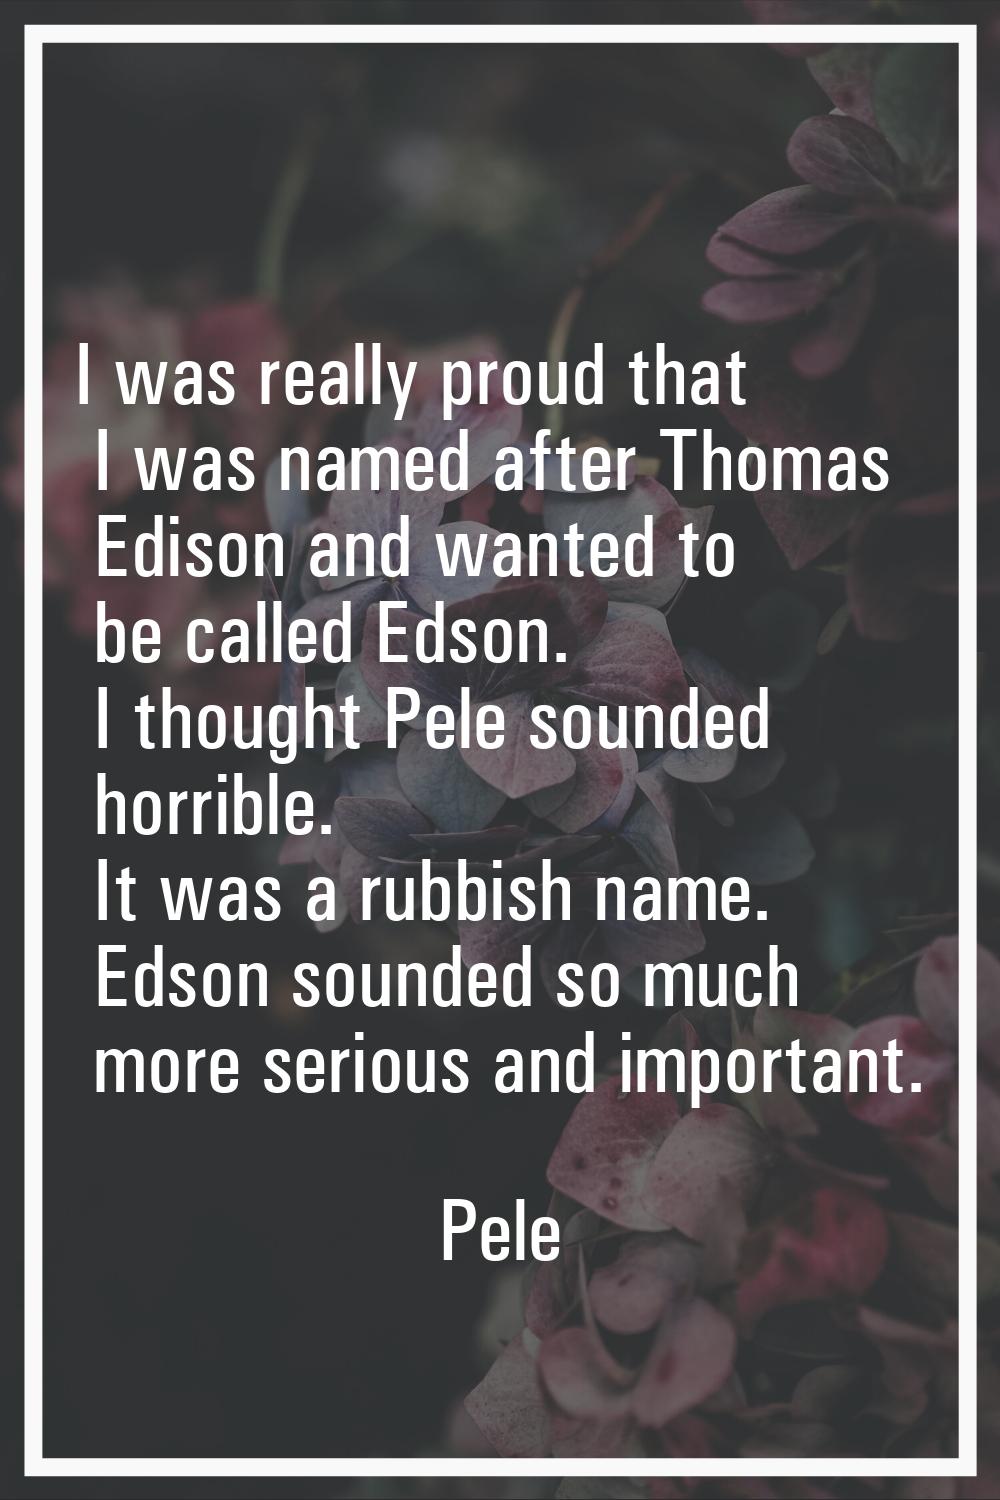 I was really proud that I was named after Thomas Edison and wanted to be called Edson. I thought Pe